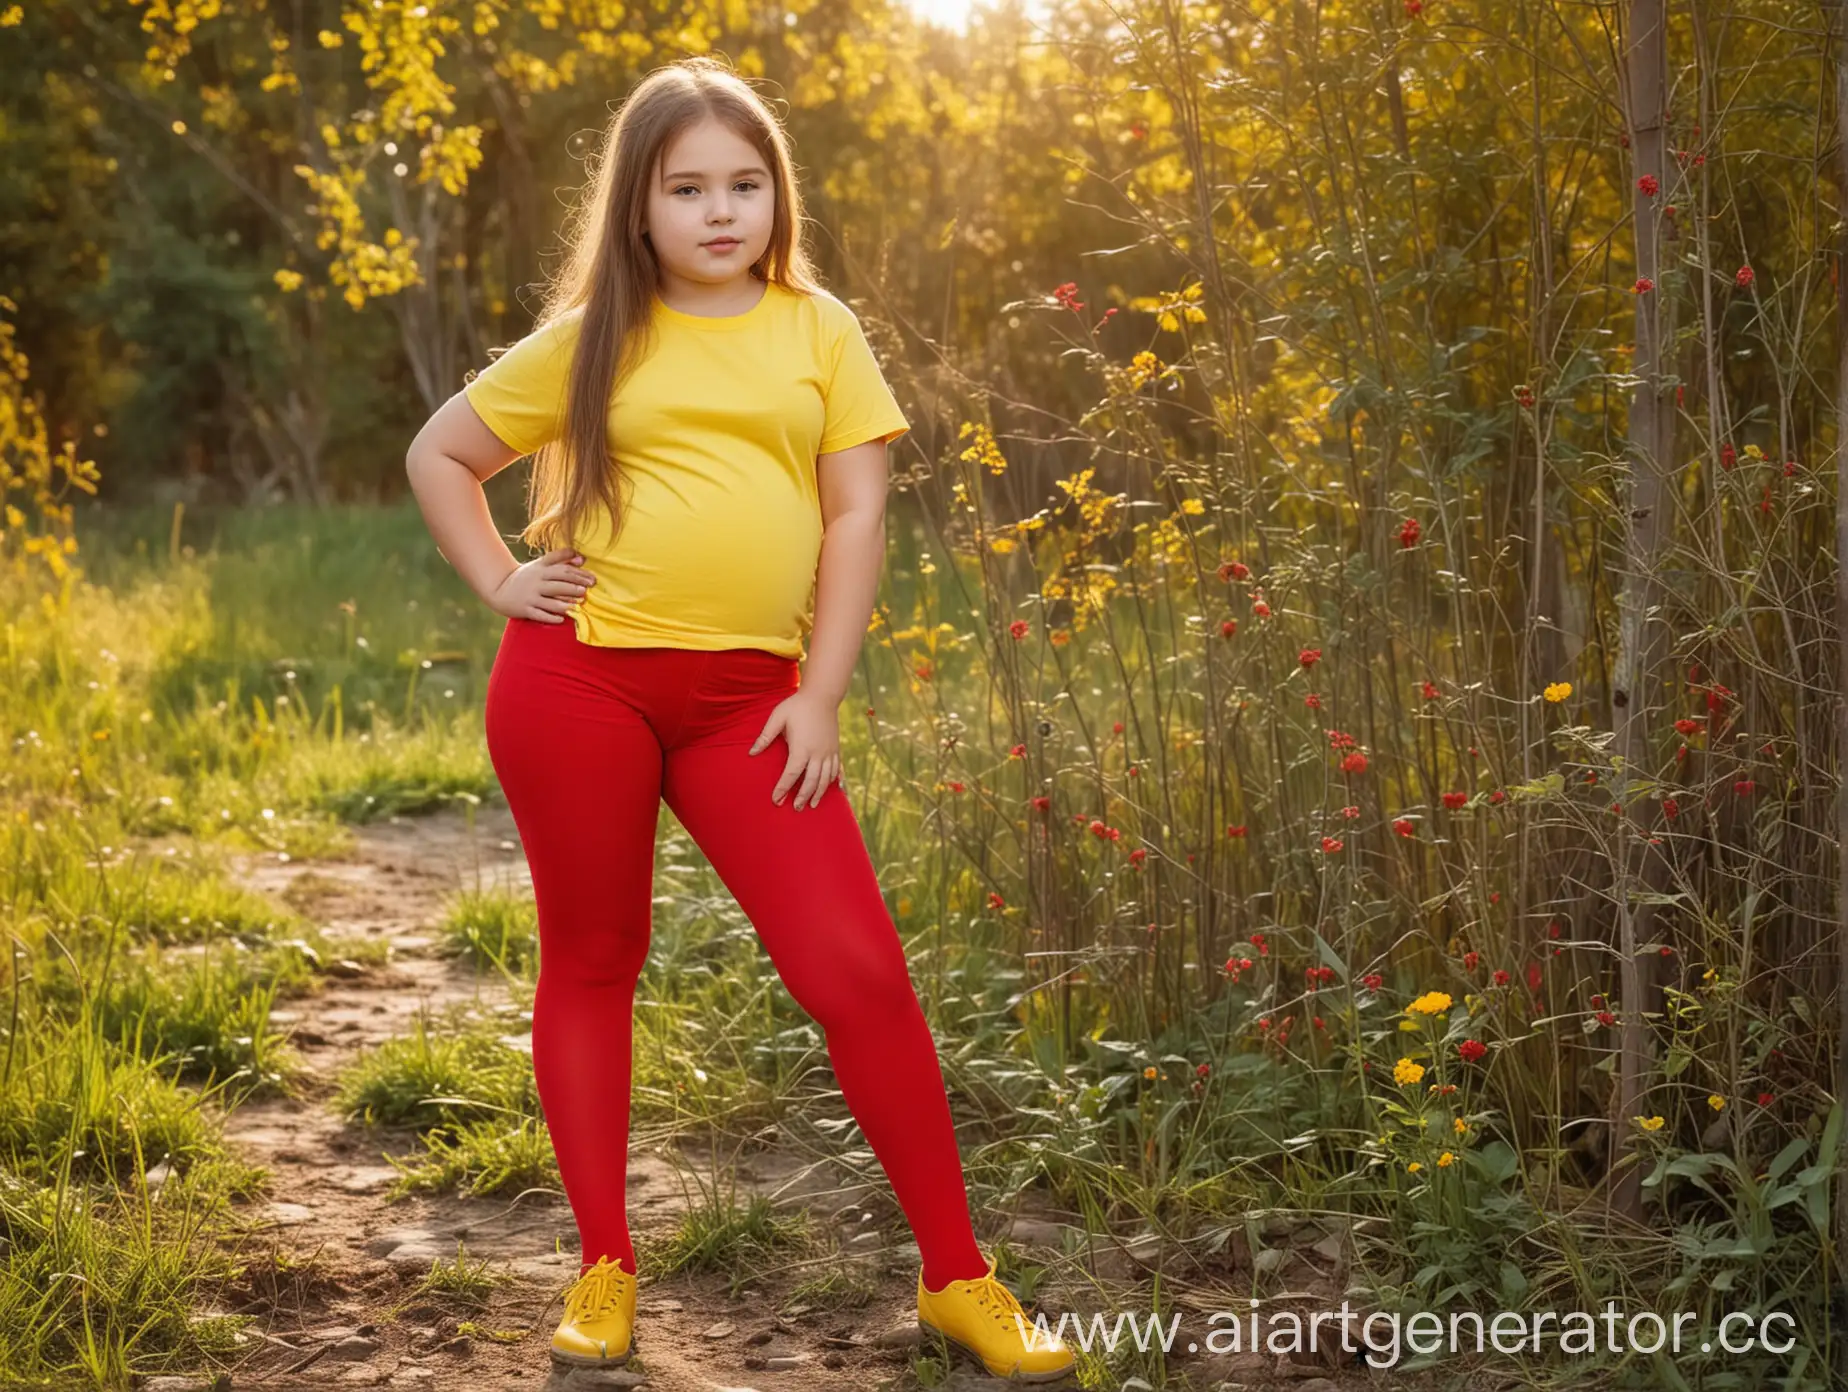 Plump preteen girl dressed in red denim shorts with red tights, yellow t-shirt . Girl standing on the nature